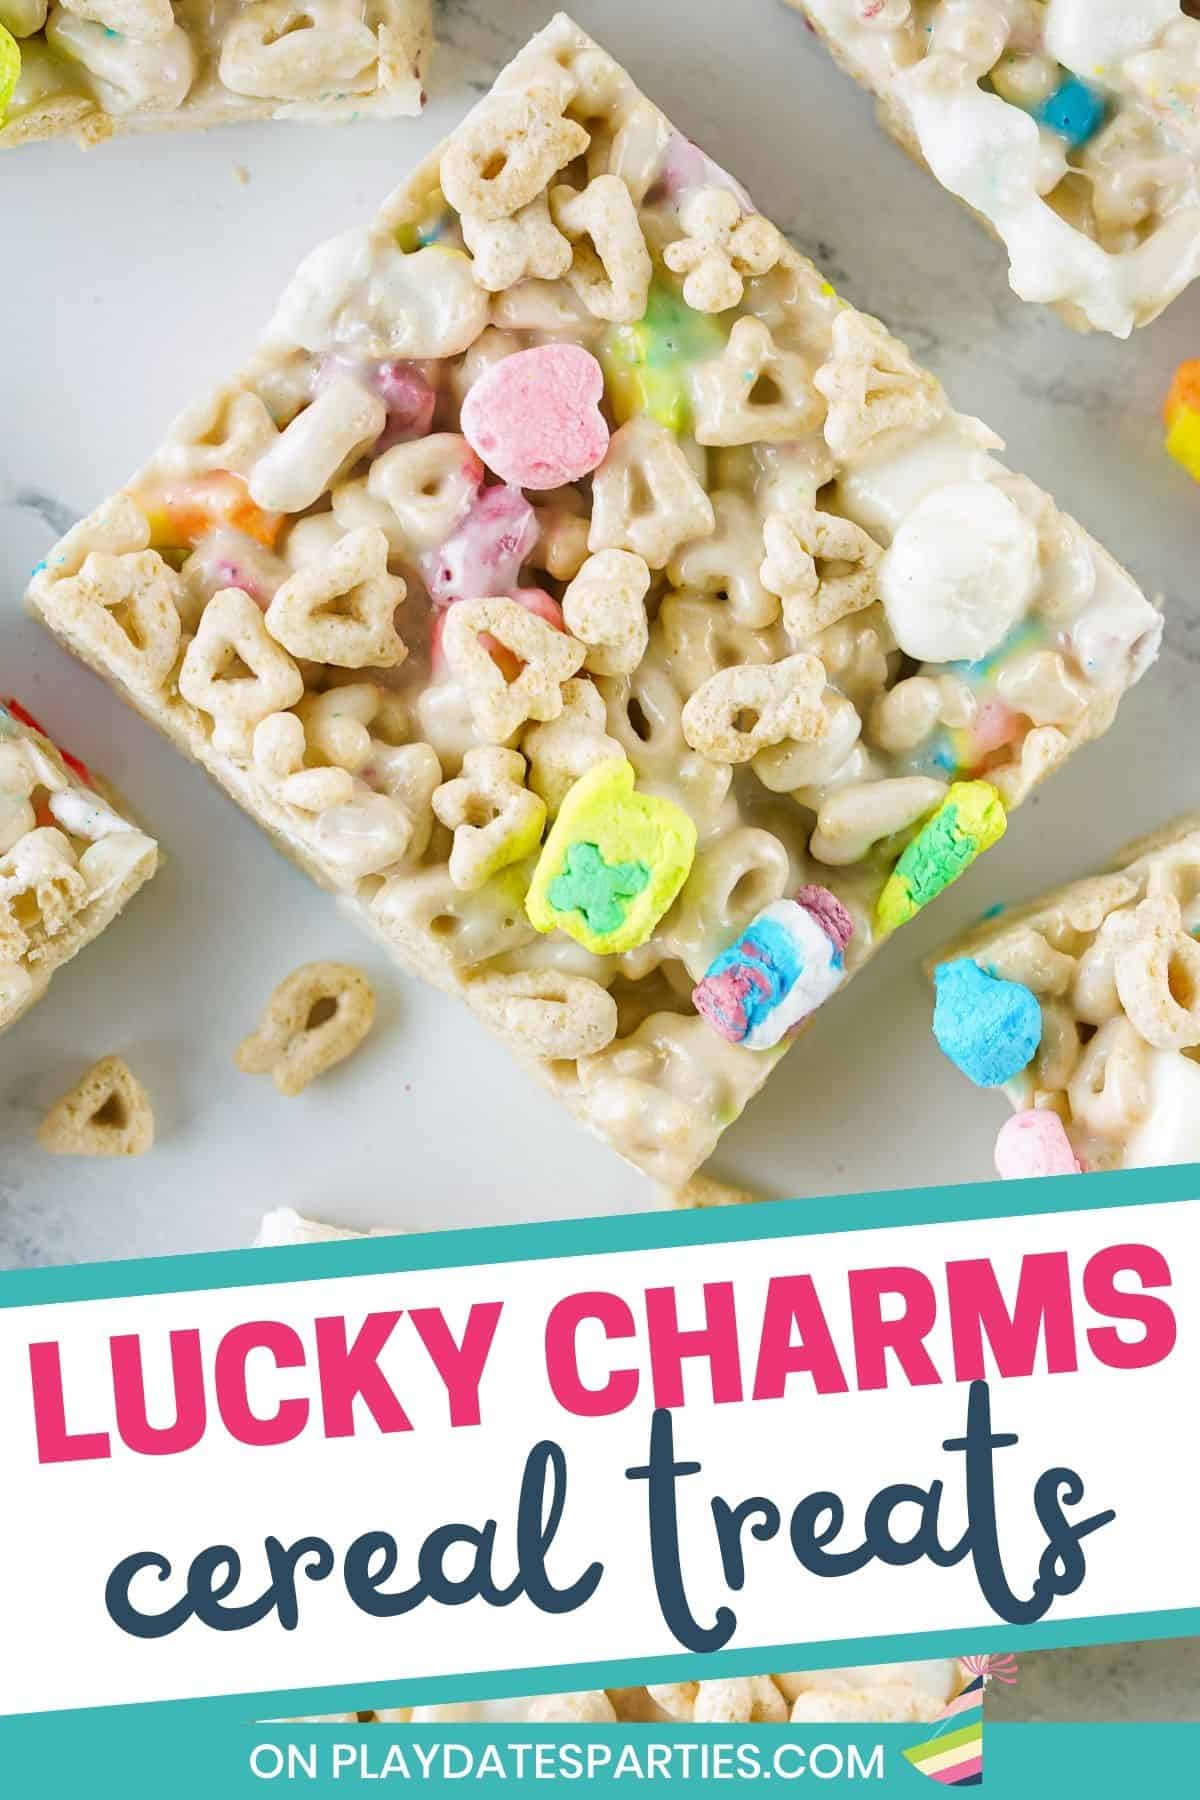 Close up of a Lucky charms treat on a marble surface.